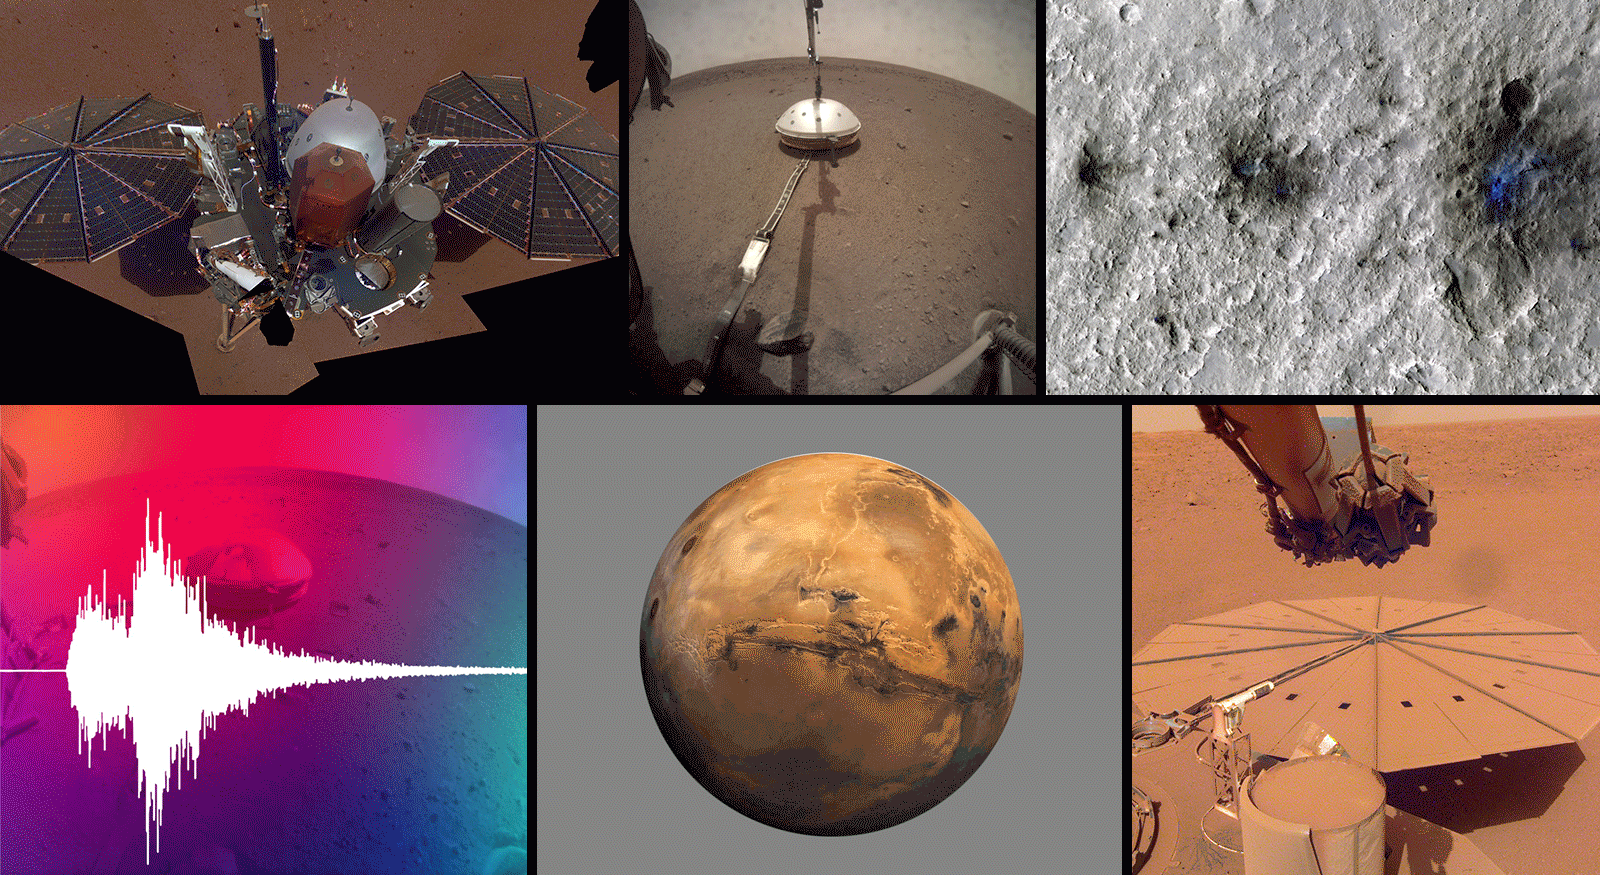 Collage of images and graphics from the InSight Mars lander mission. Links to full images and descriptions in caption.